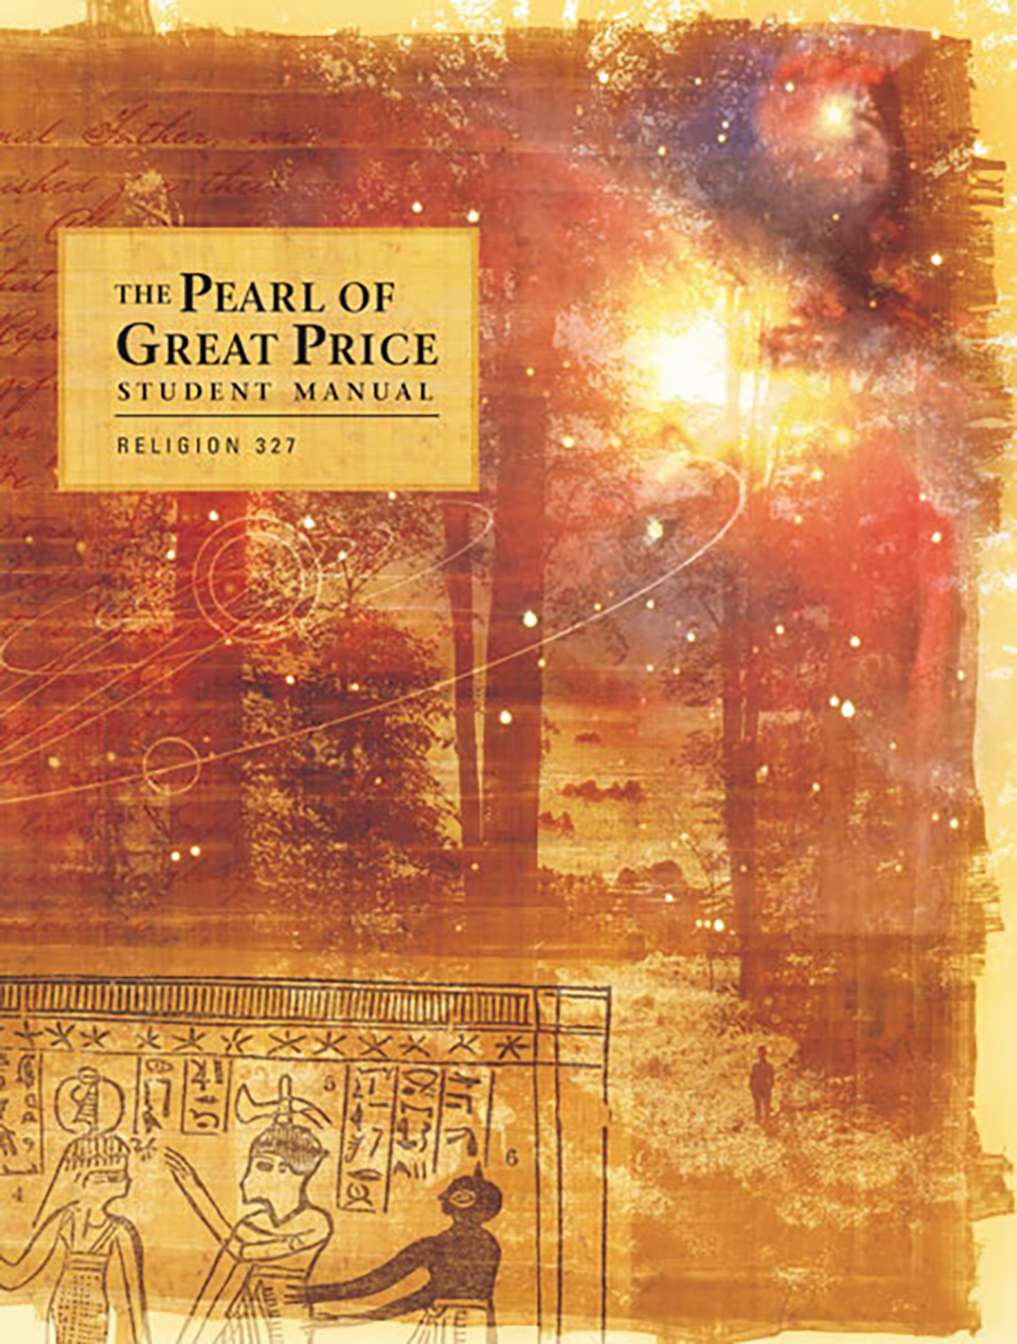 Pearl of Great Price Student Manual (Religion 327)